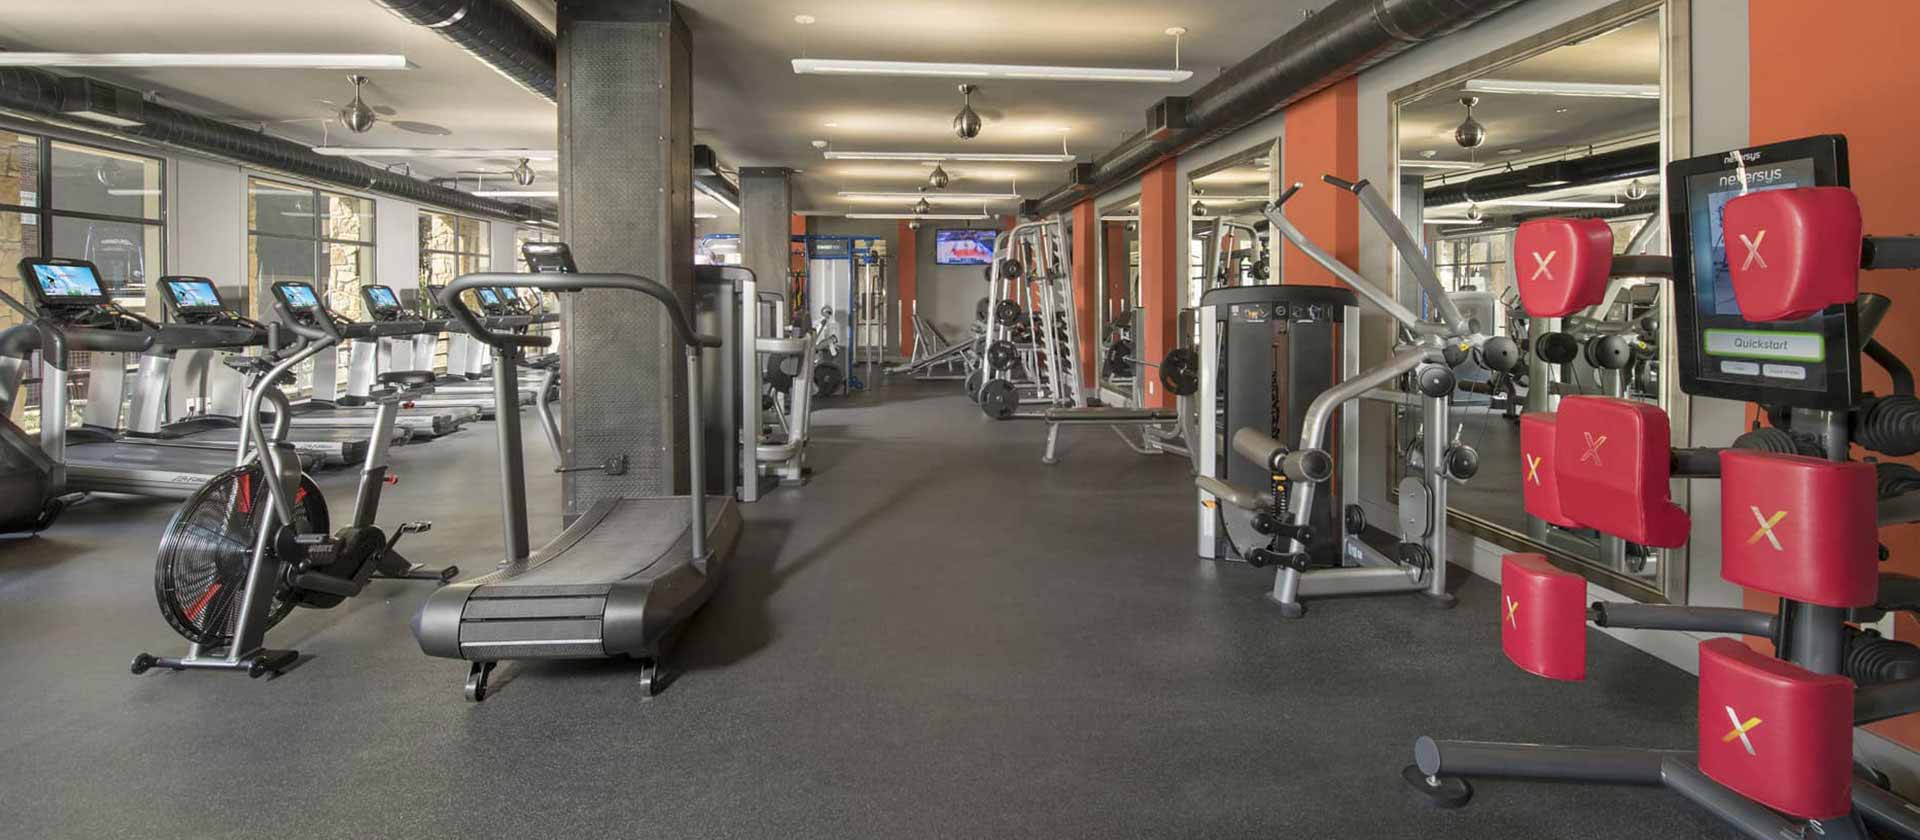 Fitness Center Upgrades and Additions 